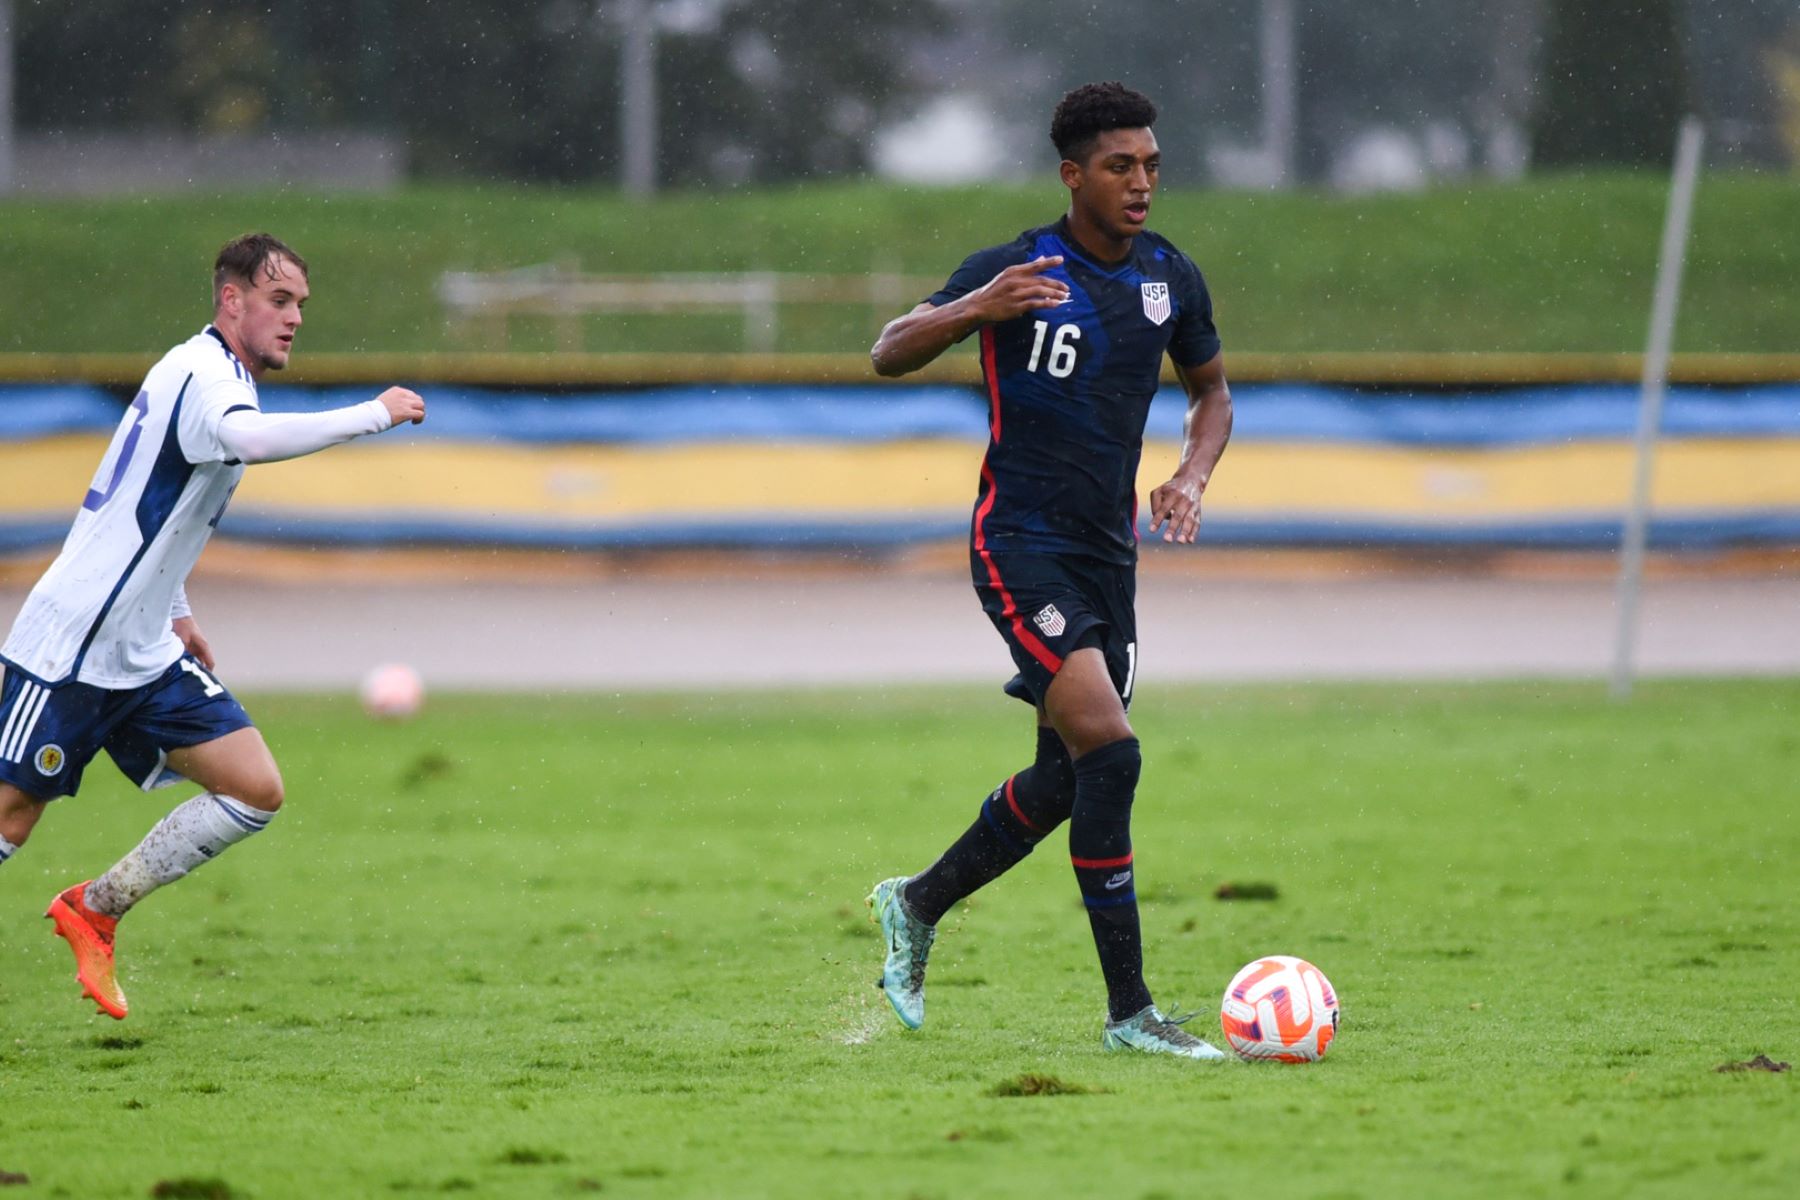 U-19 MYNT Set To Face Argentina In Buenos Aires During March International Window | U.S. Soccer Official Website